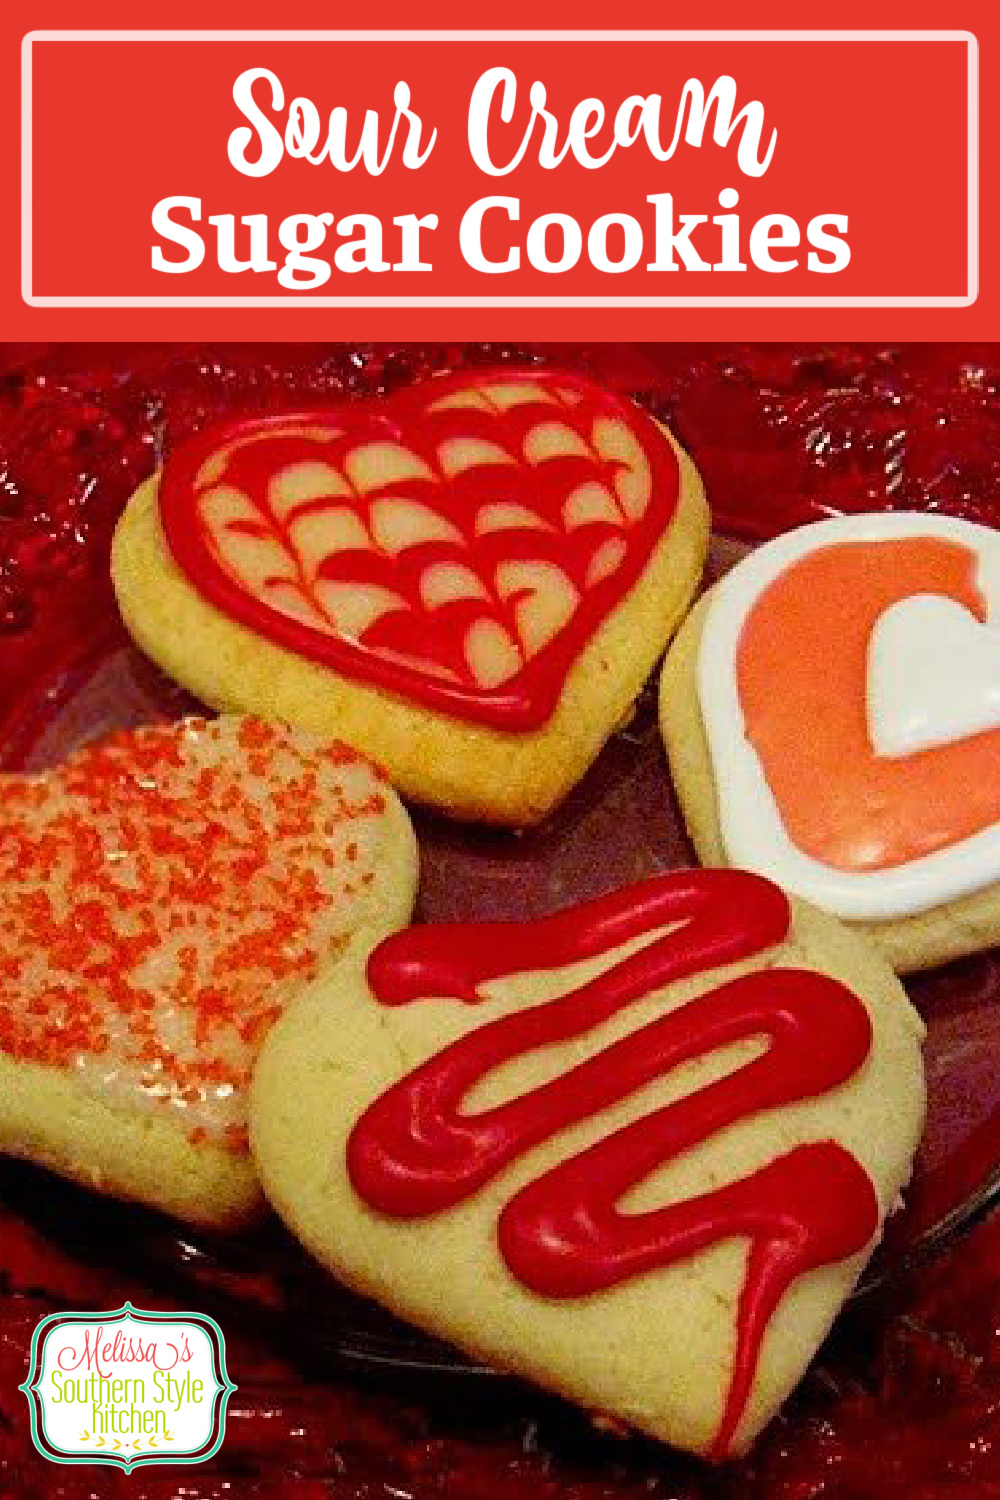 Sour Cream Sugar Cookies for the special people in your life #valentinesday #sugarcookies #desserts #bestcookierecipes #sourcreamsugarcookies #christmascookies #southernrecipes #desserts #easycookierecipes